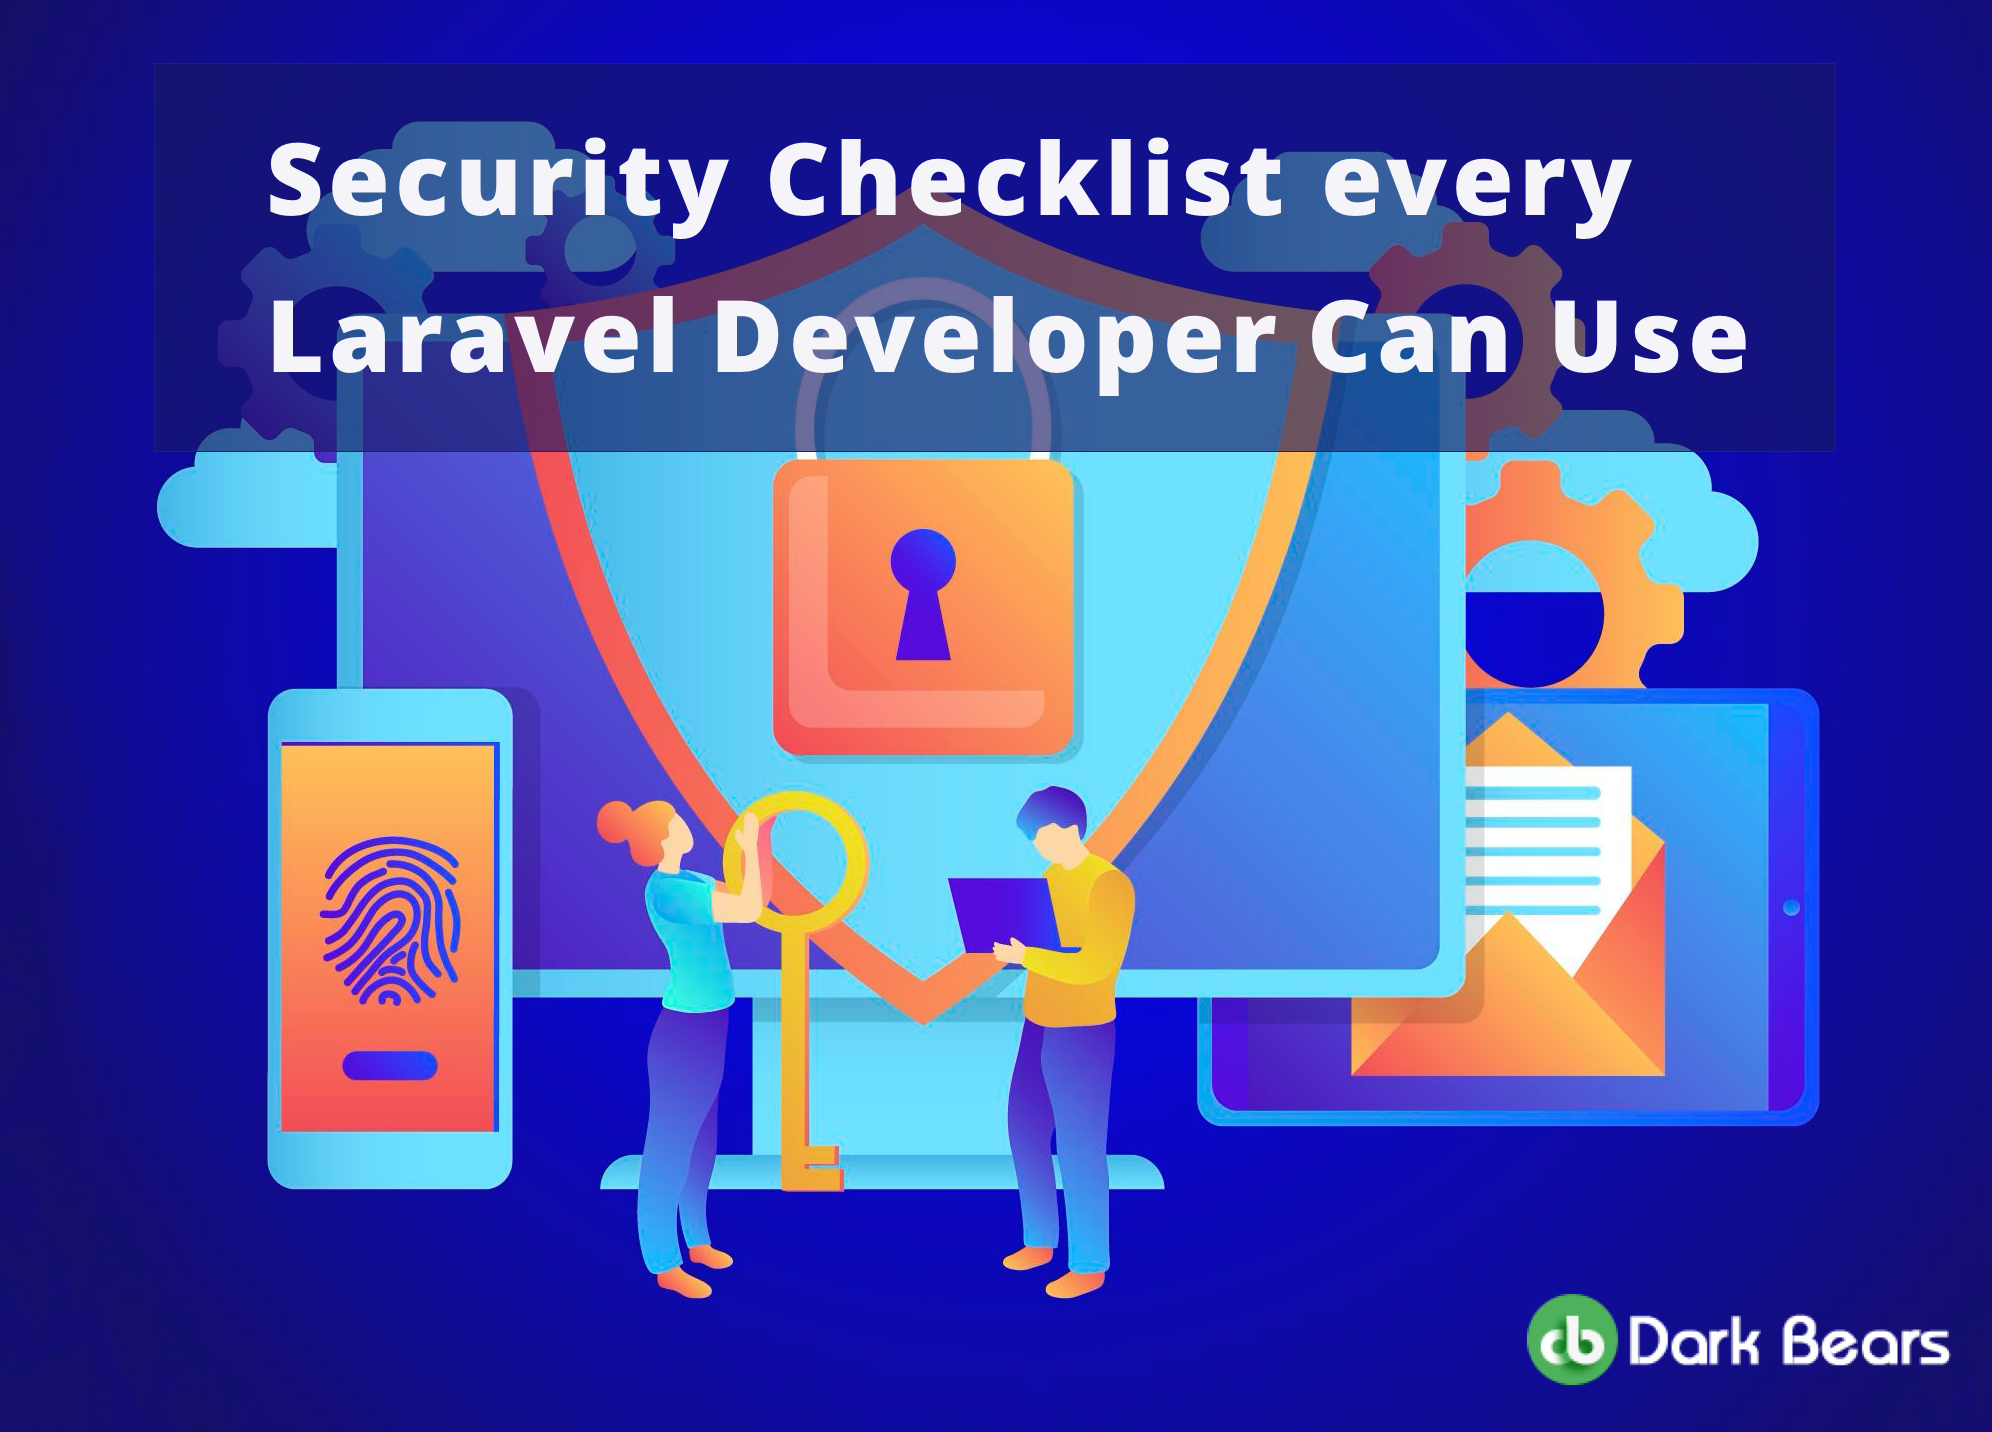 Security Checklist Every Laravel Developer Can Use